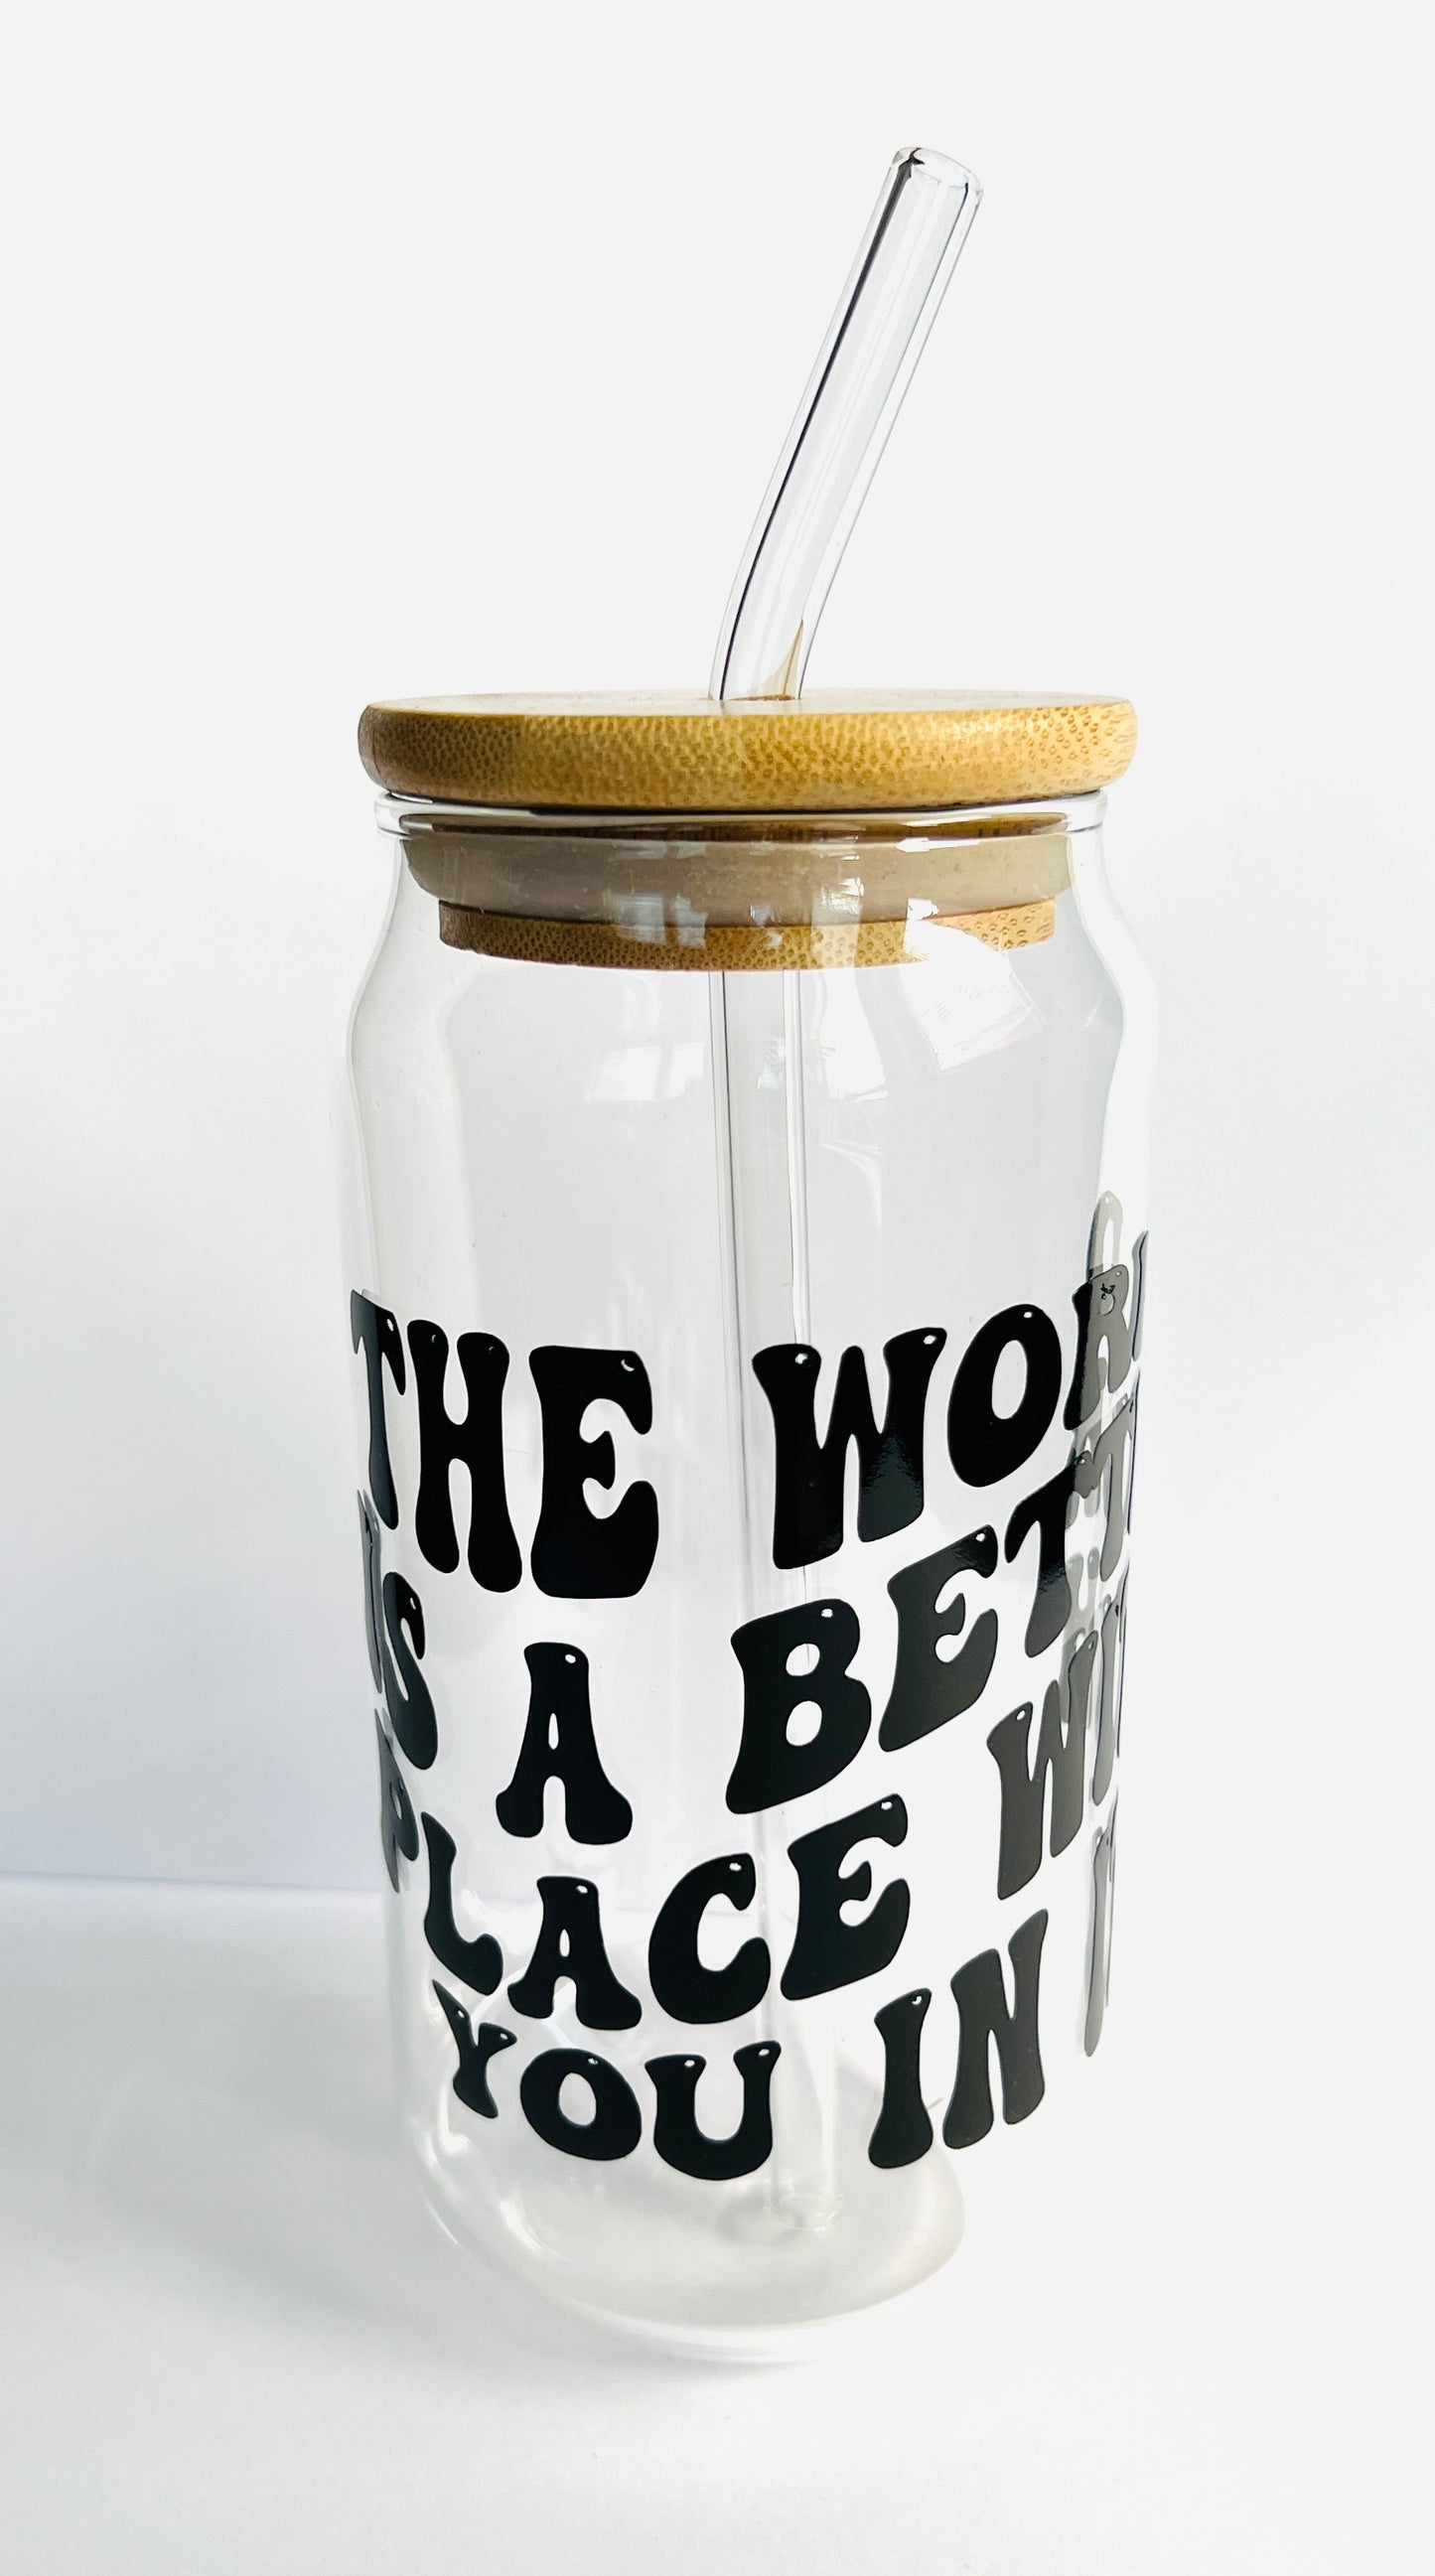 THE WORLD IS A BETTER PLACE drinking glass